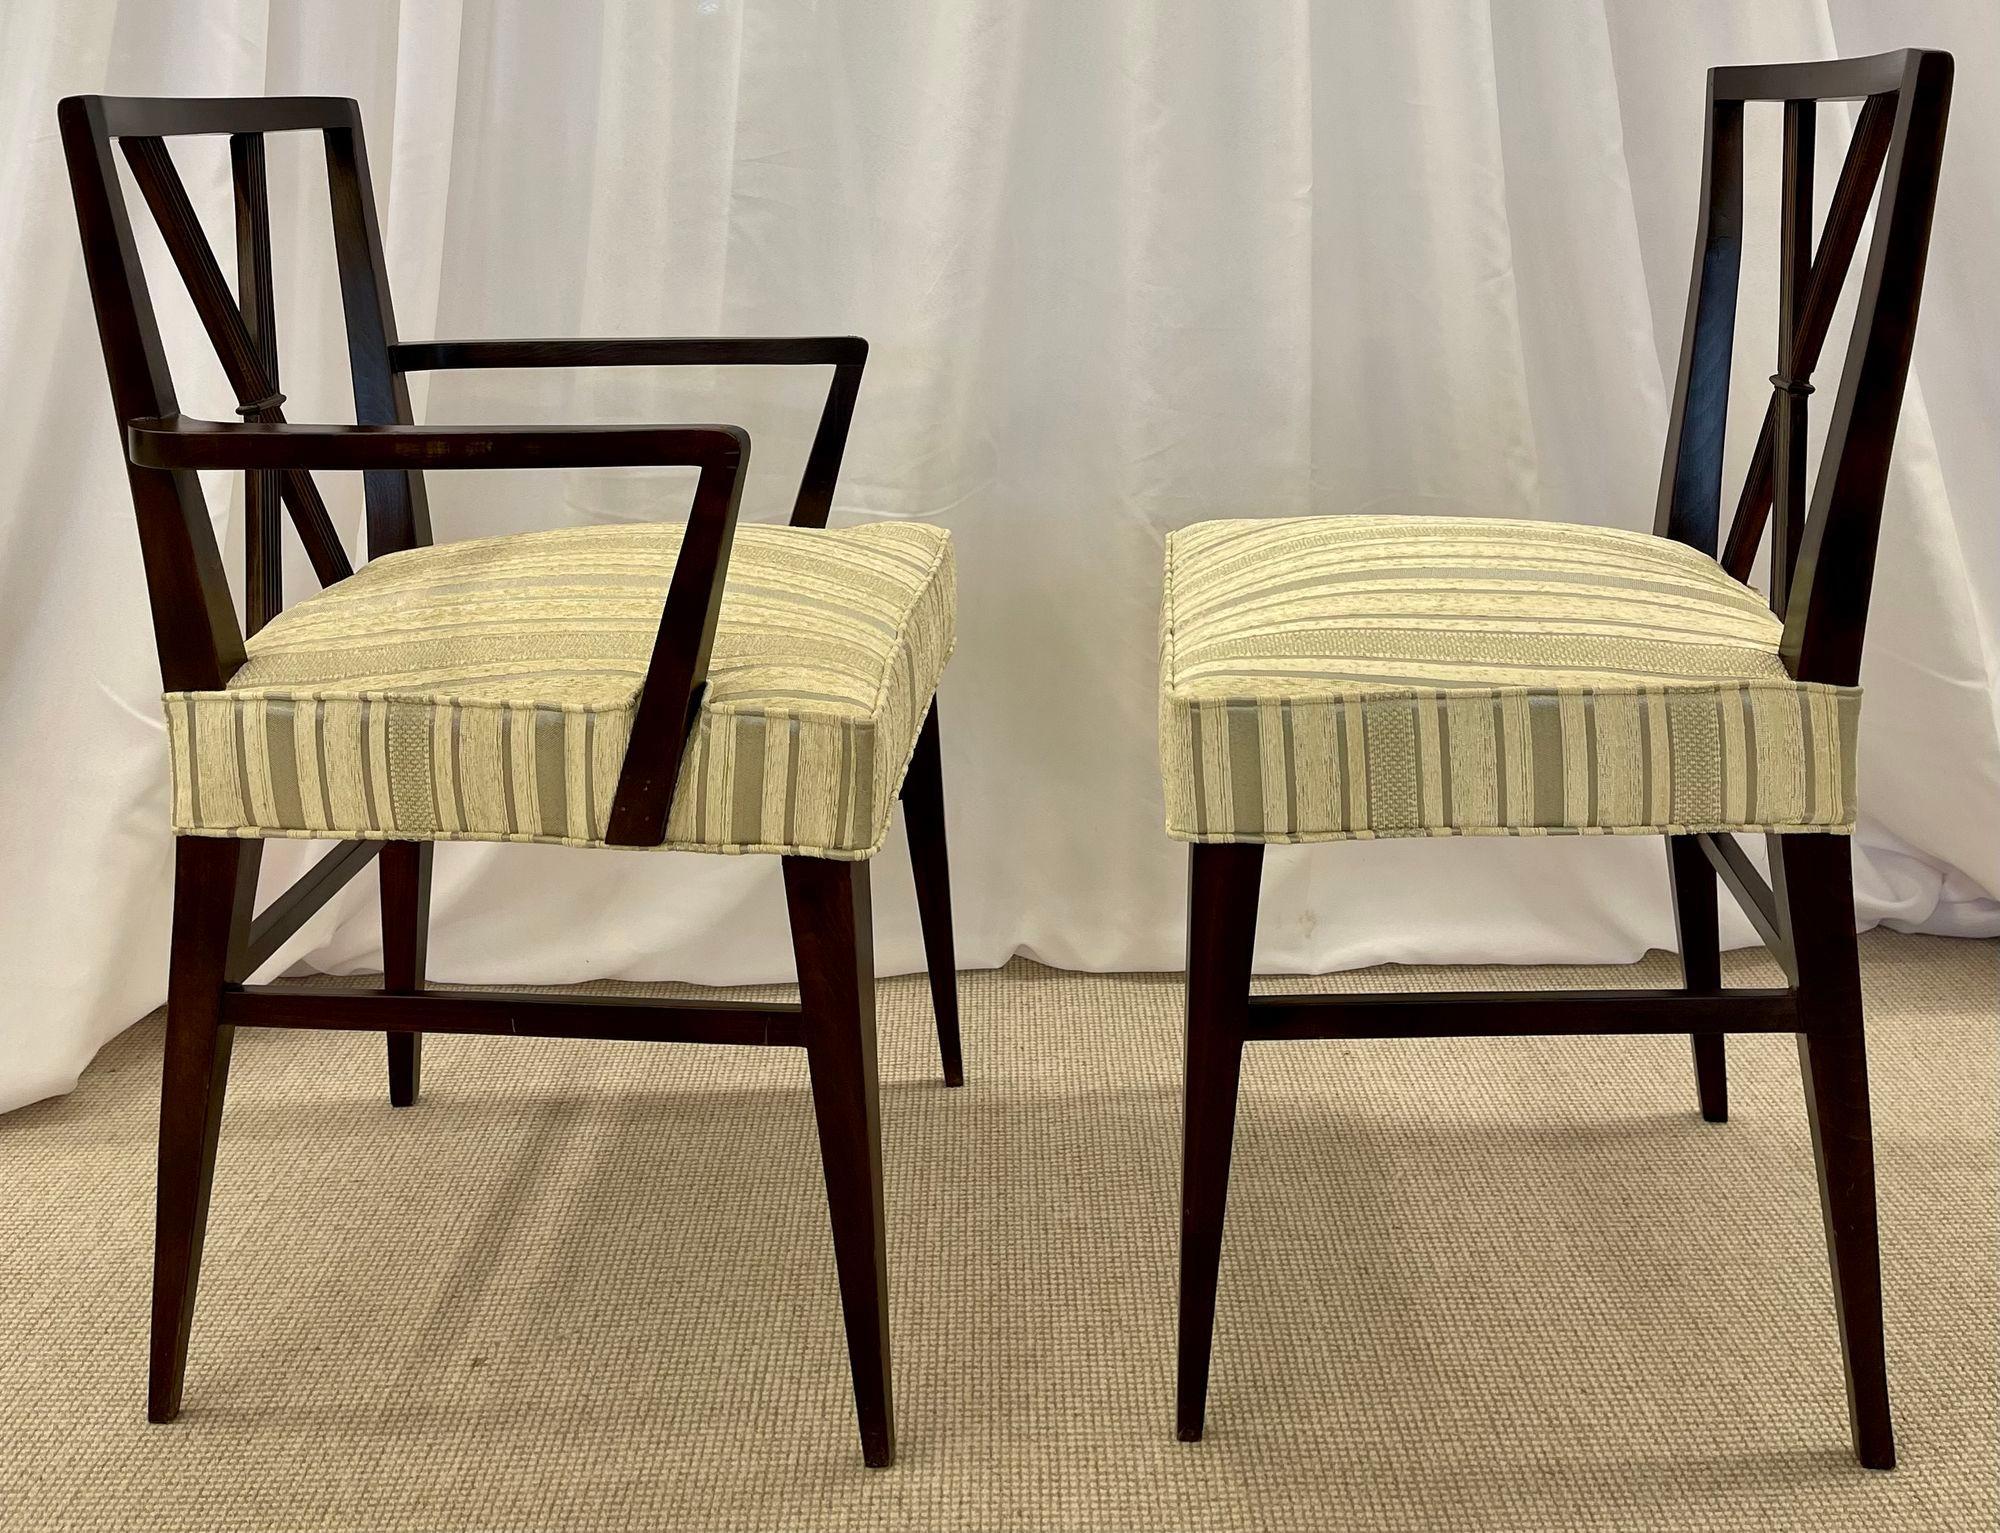 Tommi Parzinger Attrib., Mid-Century Modern, Twelve Dining Chairs, 1960s For Sale 2